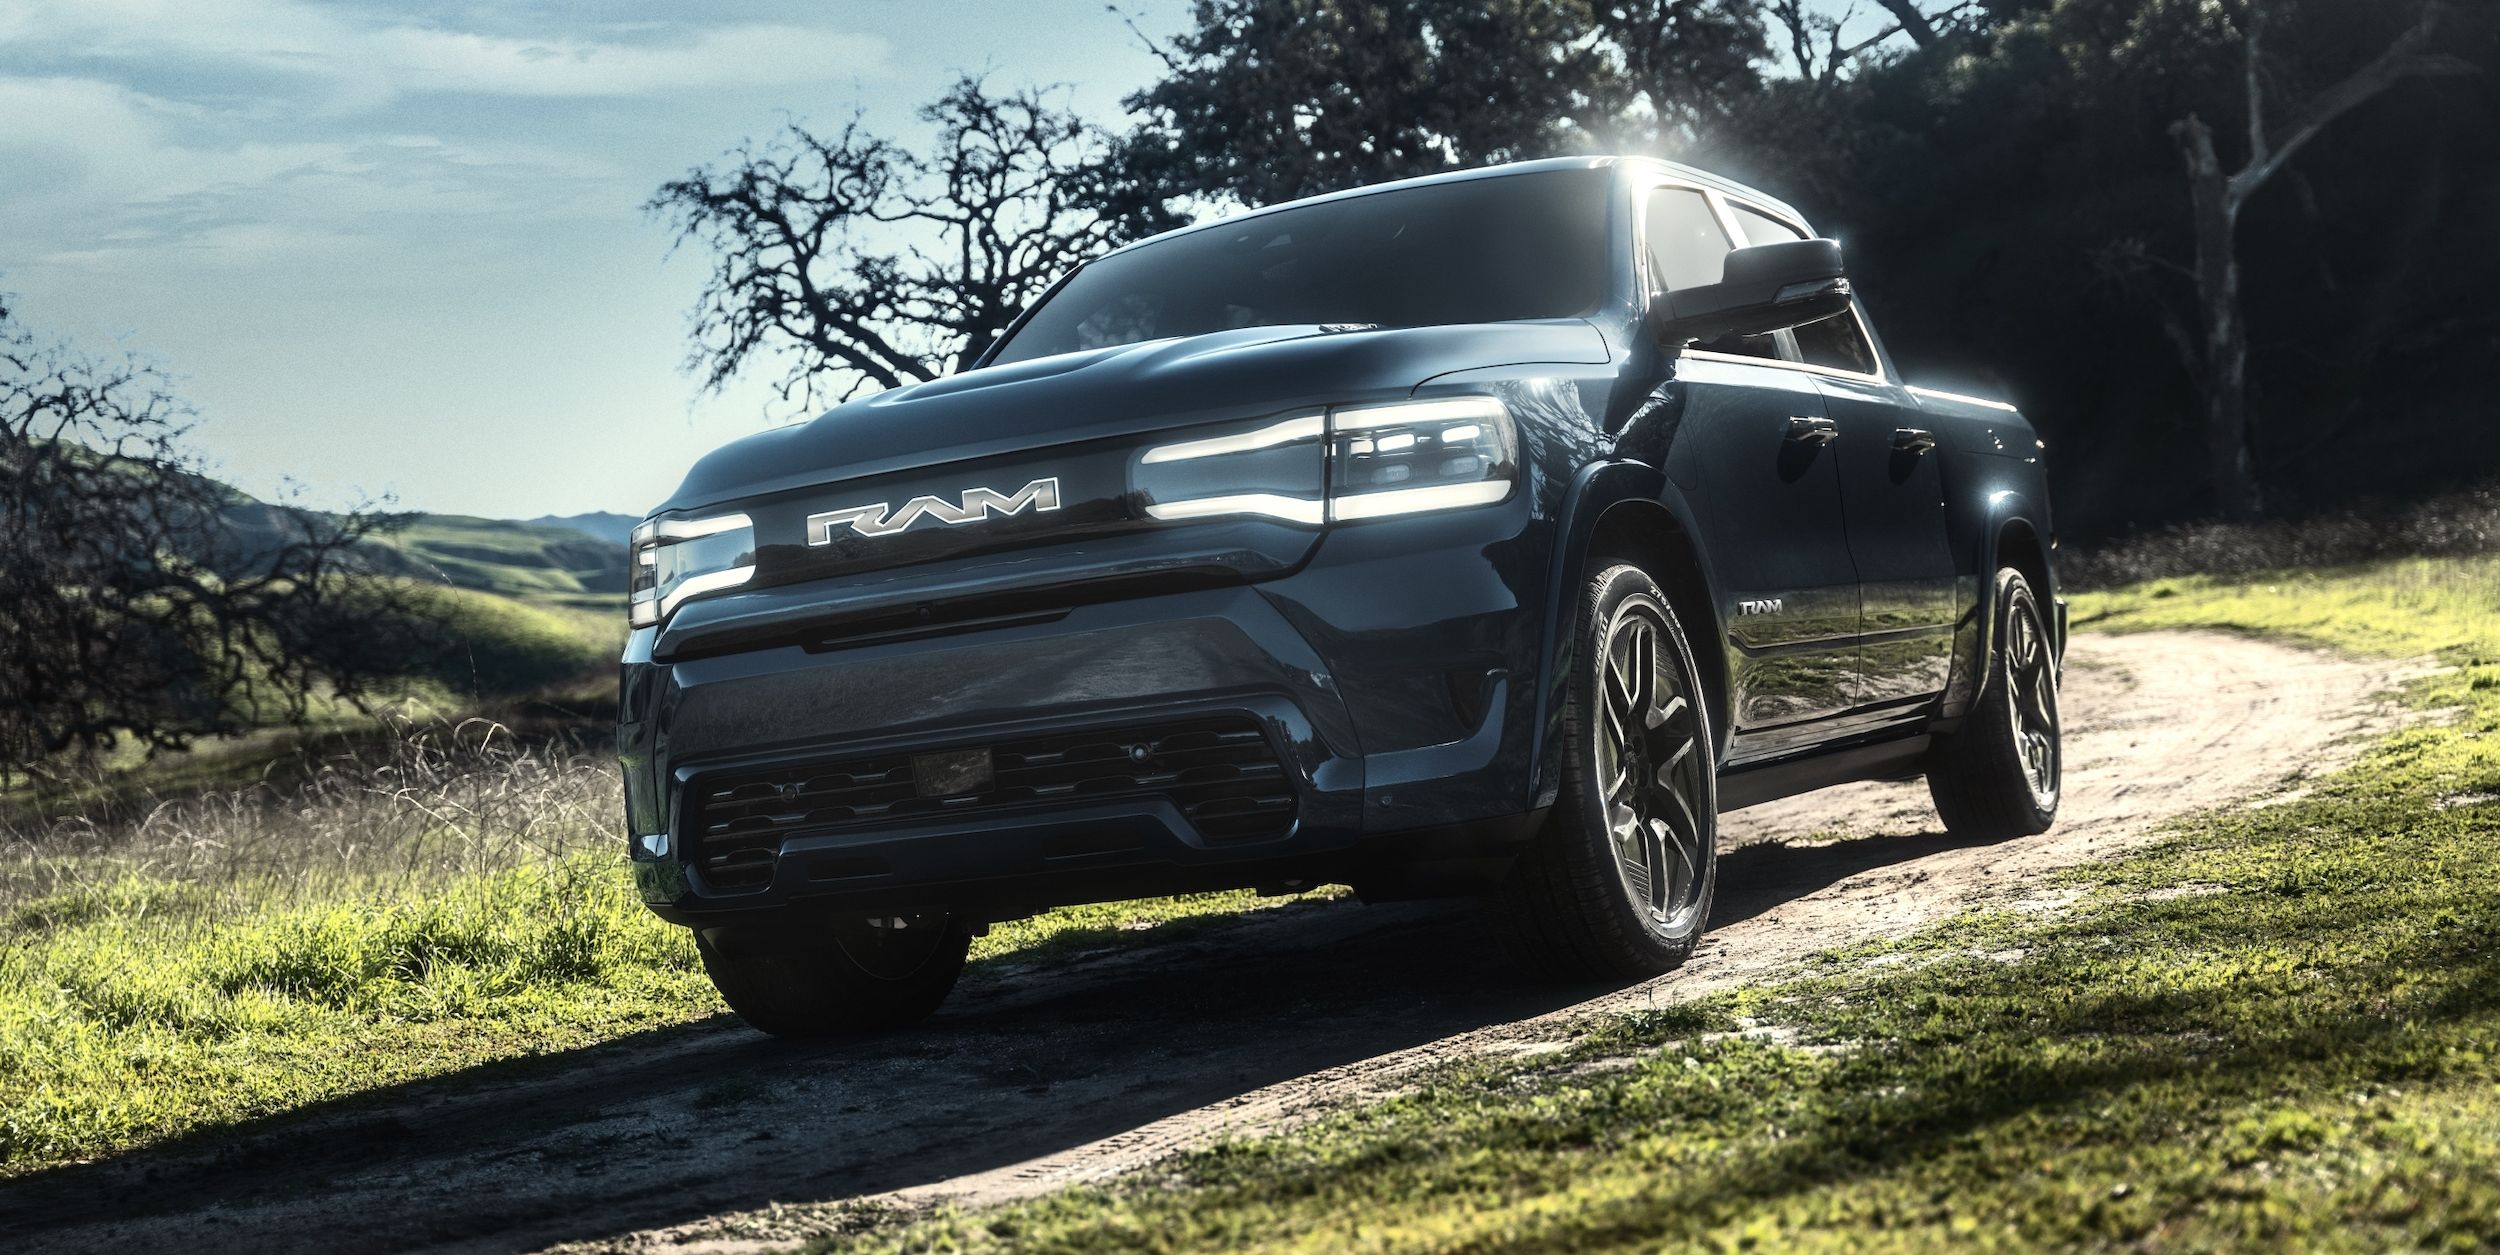 2025 Ram 1500 REV Has an Even Bigger Battery on the Way, Chief Engineer Says